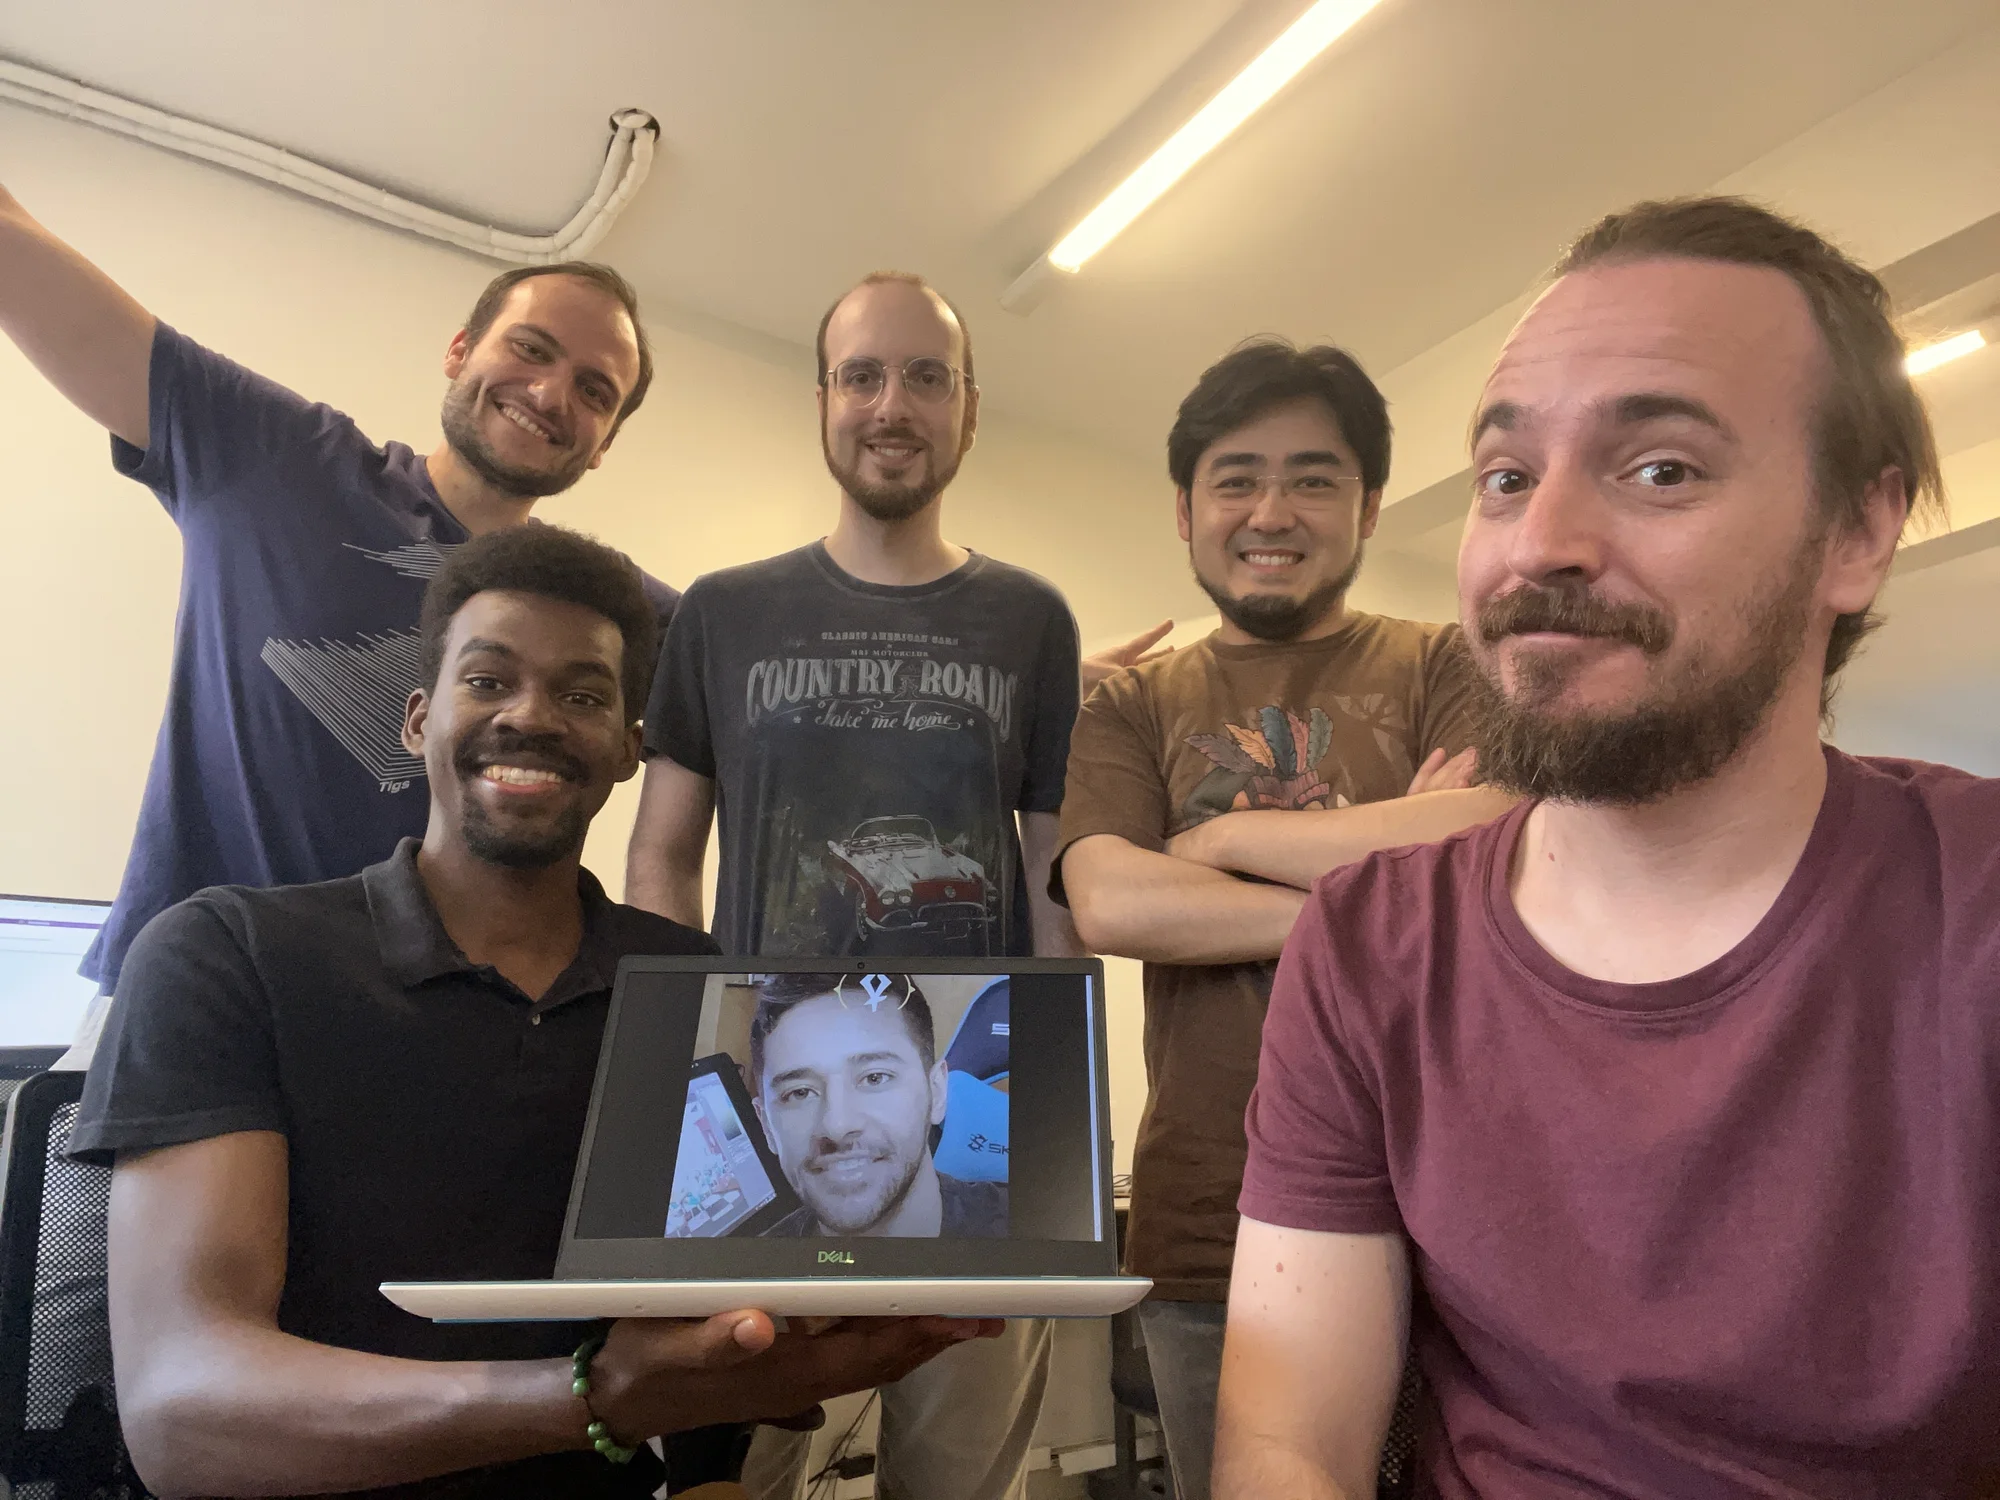 Five people stand around a laptop that shows a picture of another person’s face.